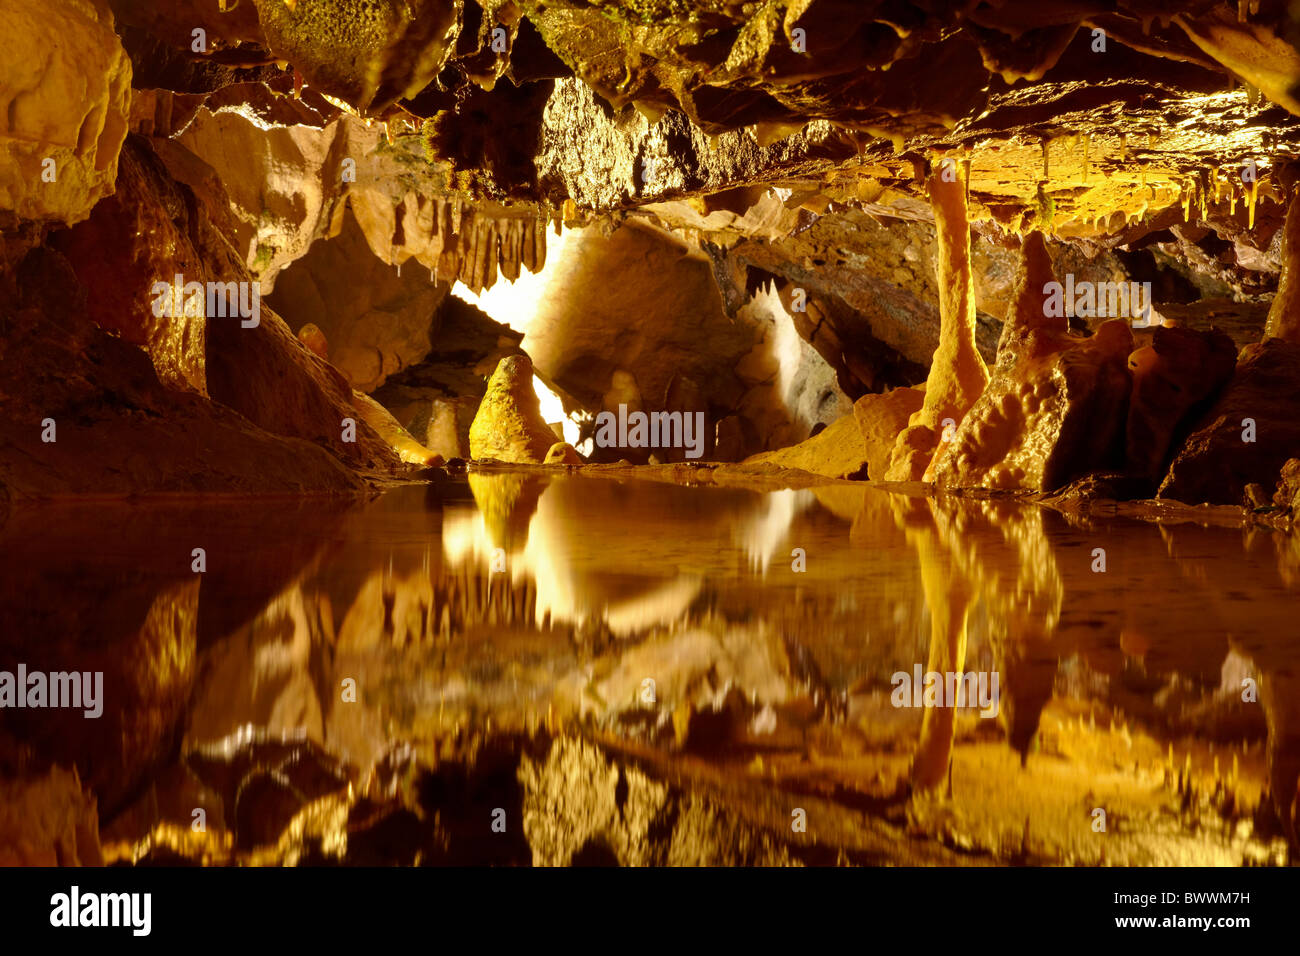 Stalactites and stalagmites reflected in pool, Gough's Cave, Cheddar Caves, Somerset, England, United Kingdom Stock Photo